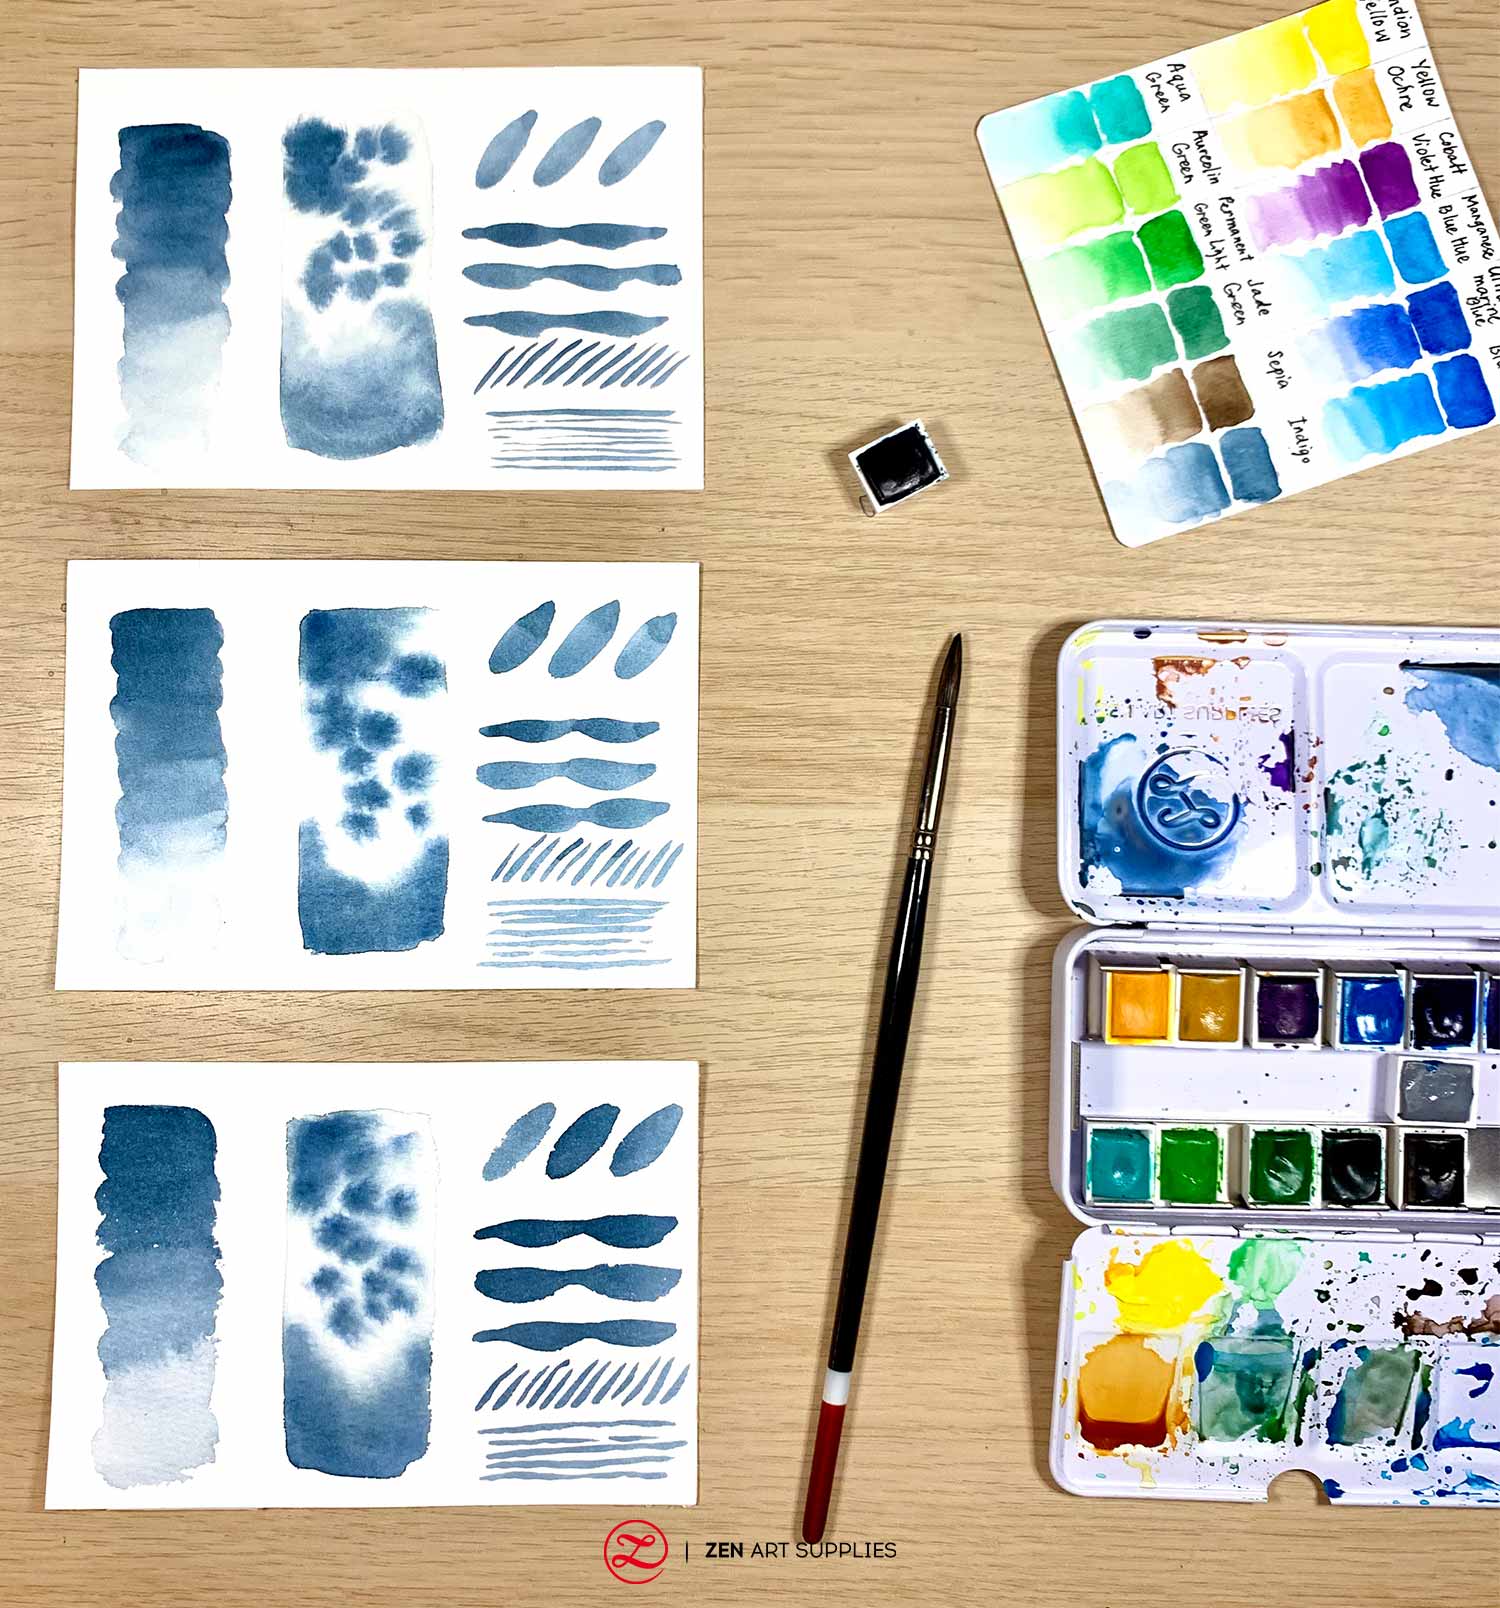 Three different textures of watercolor paper tested out using indigo watercolor paint and a #5 round brush.